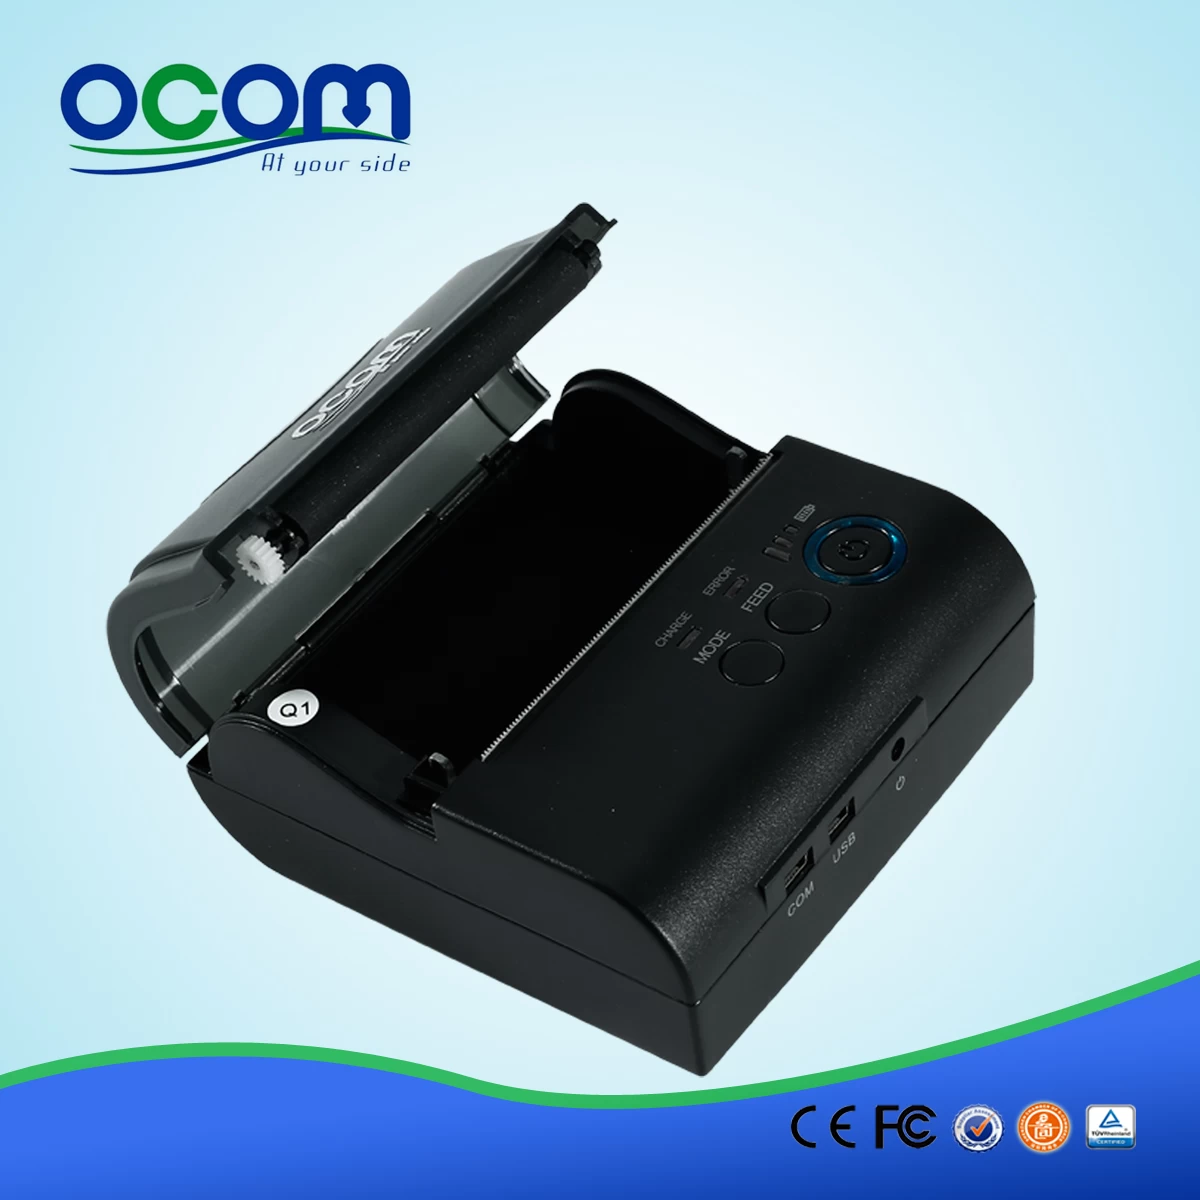 3 inch Android or IOS Bluetooth Thermal Printer---OCPP-M082